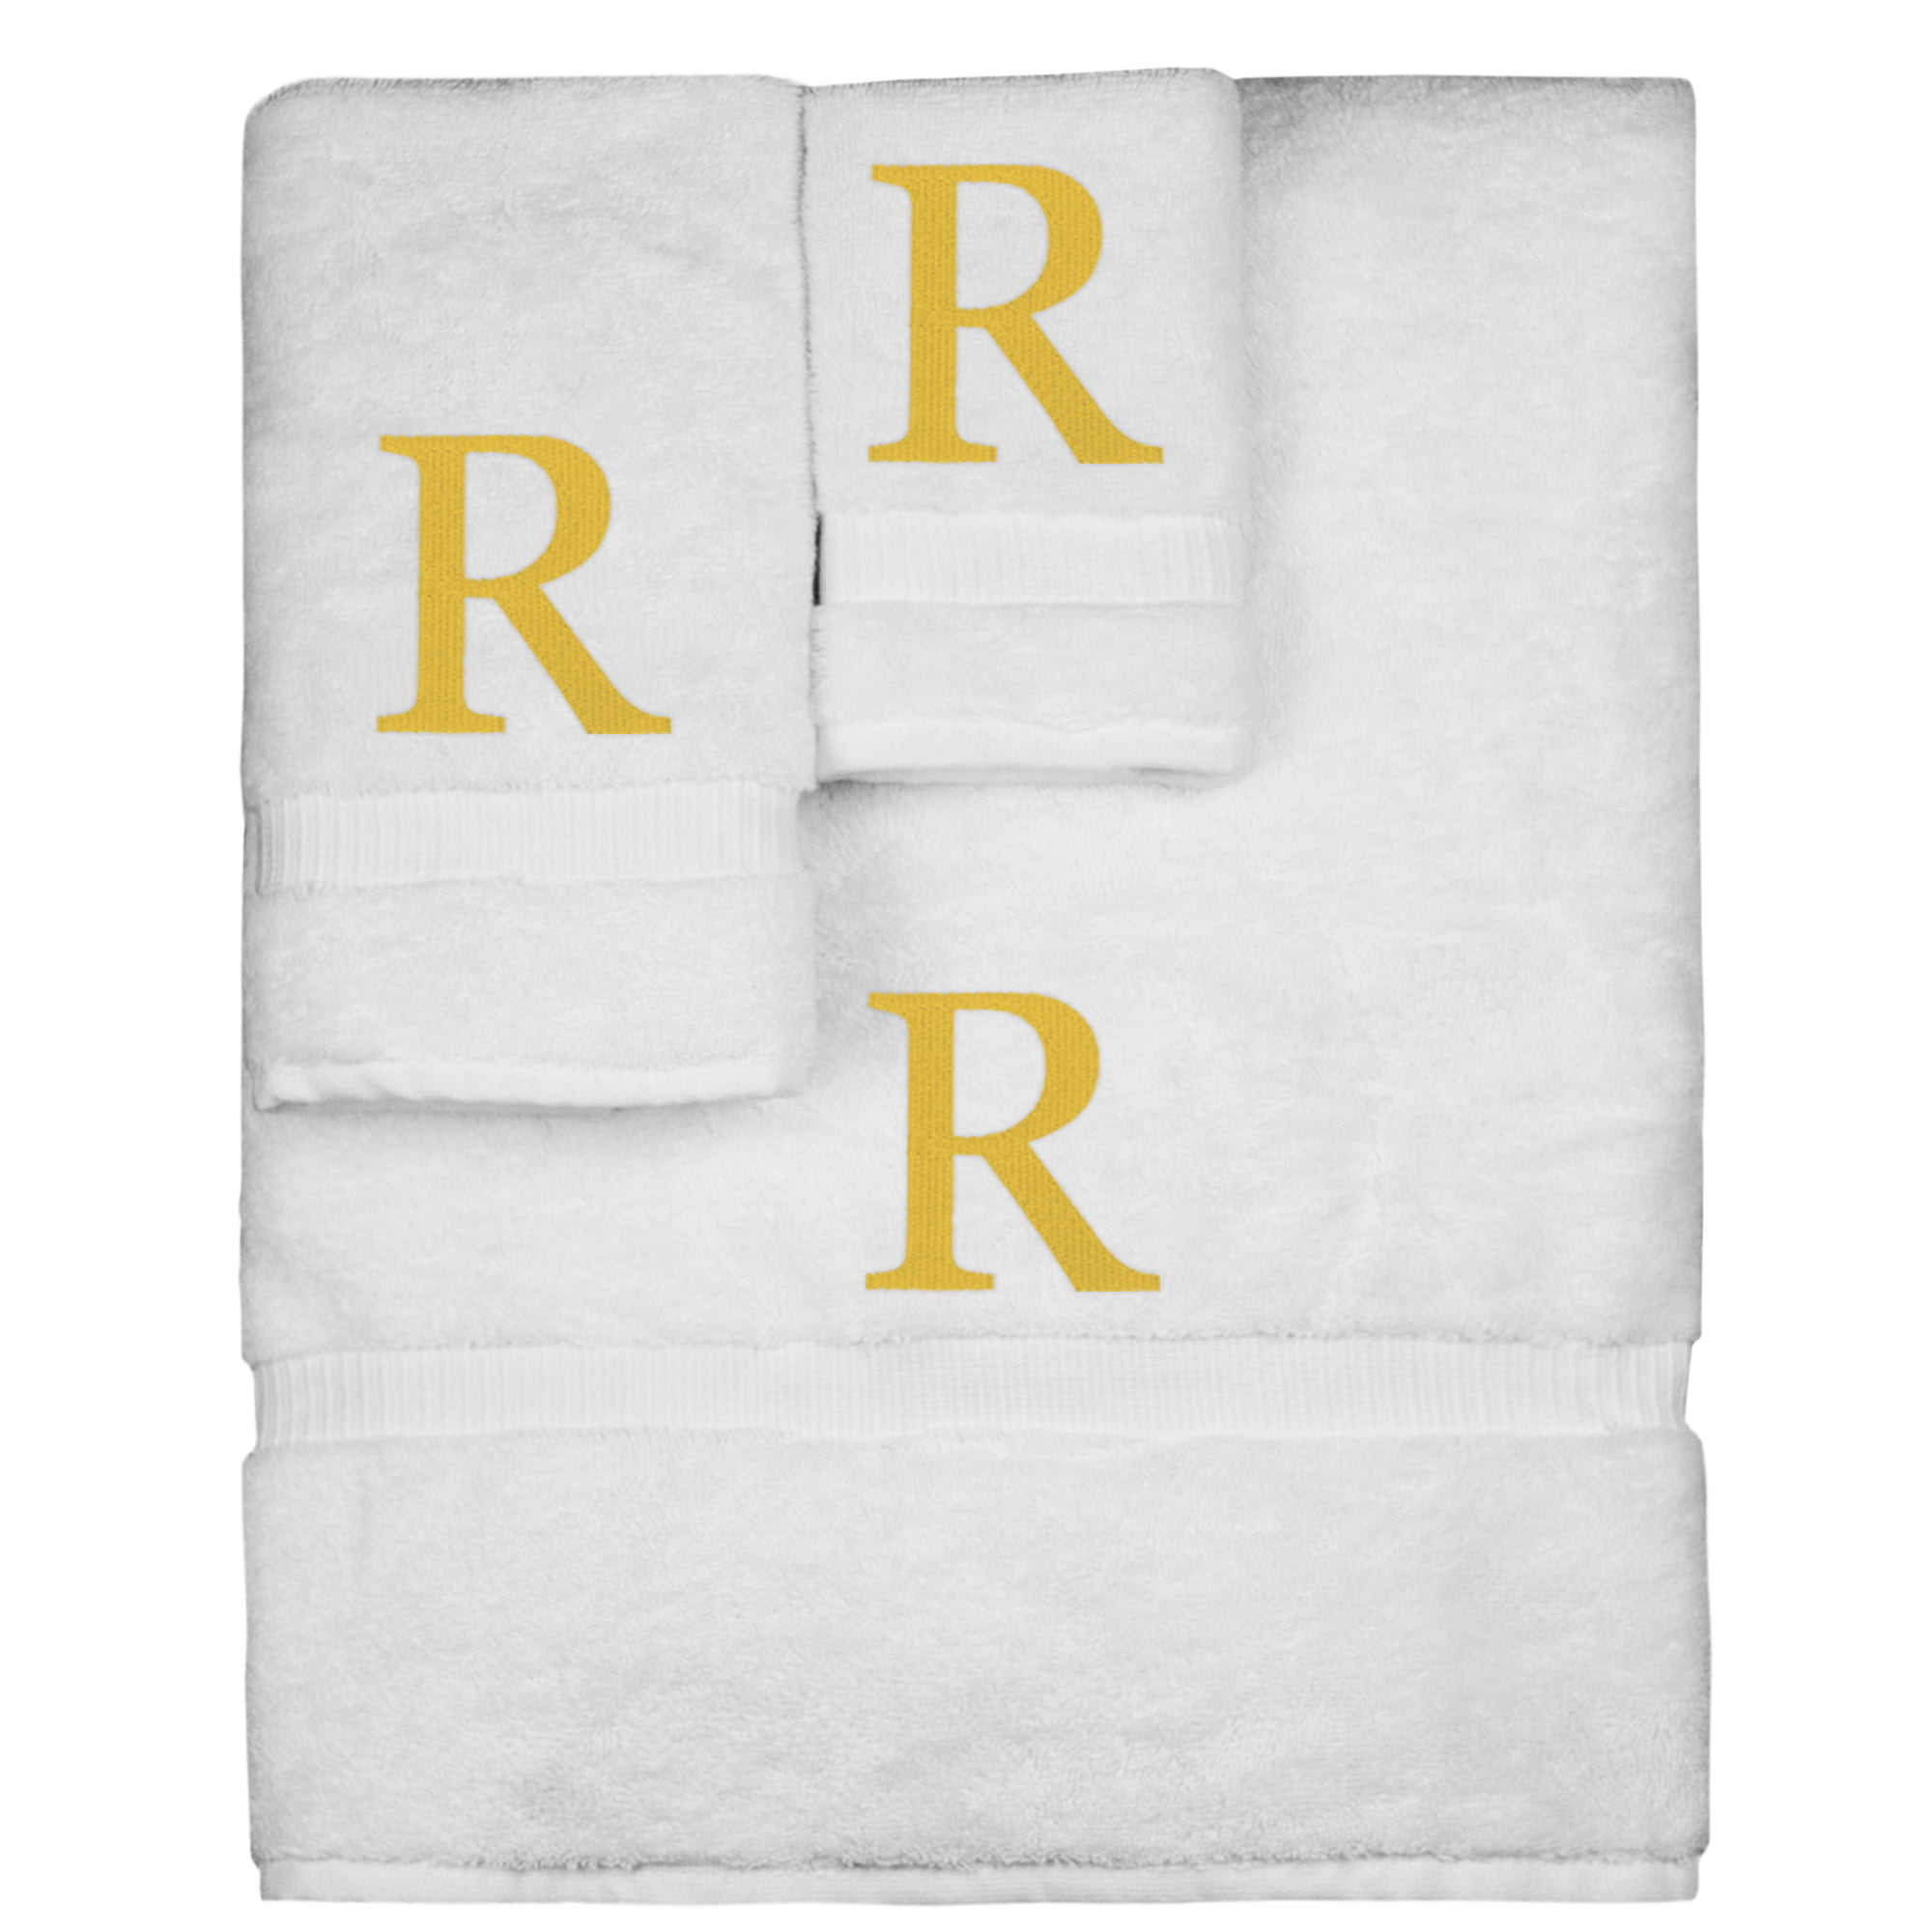 3 Piece Letter R Monogrammed Bath Towels Set, White Cotton Bath Towel, Hand  Towel, and Washcloth with Blue Embroidered Initial R for Wedding Gift